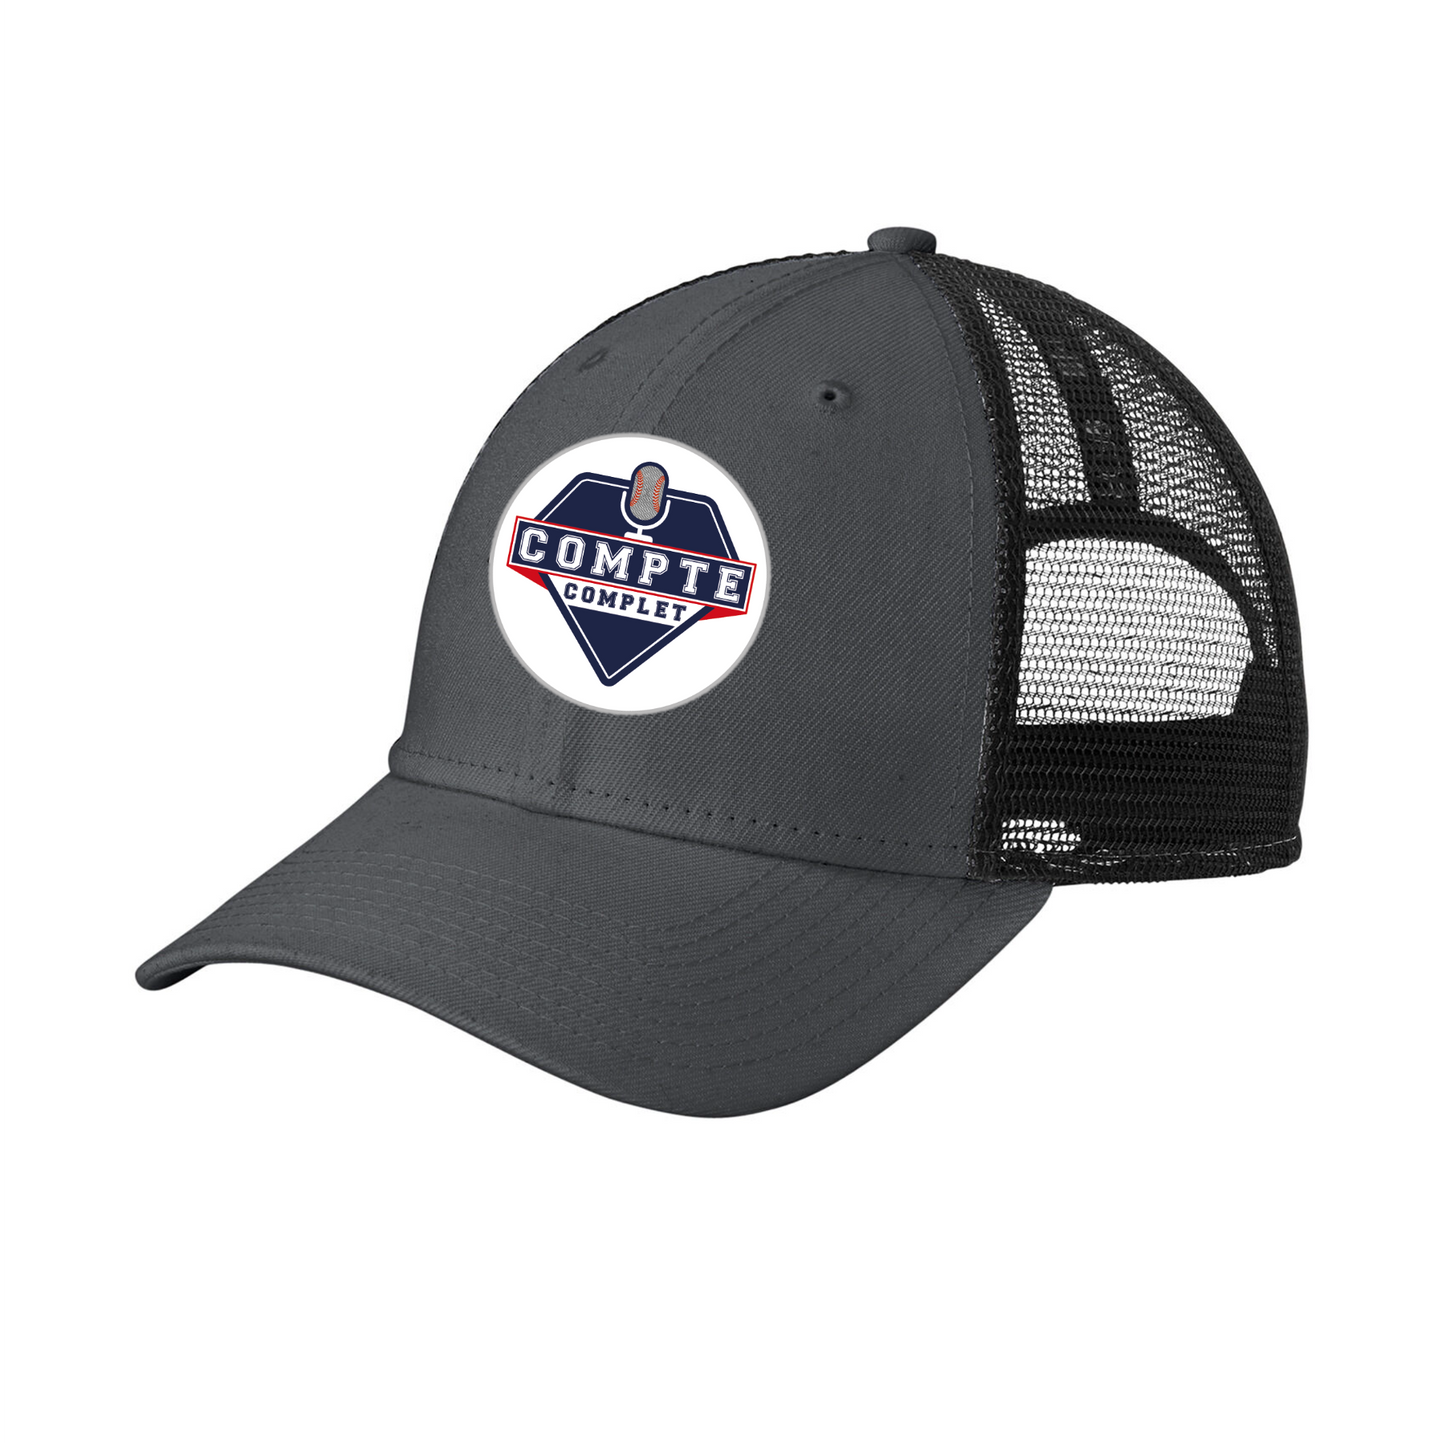 CASQUETTE 9FORTY TRUCKER COMPTE COMPLET